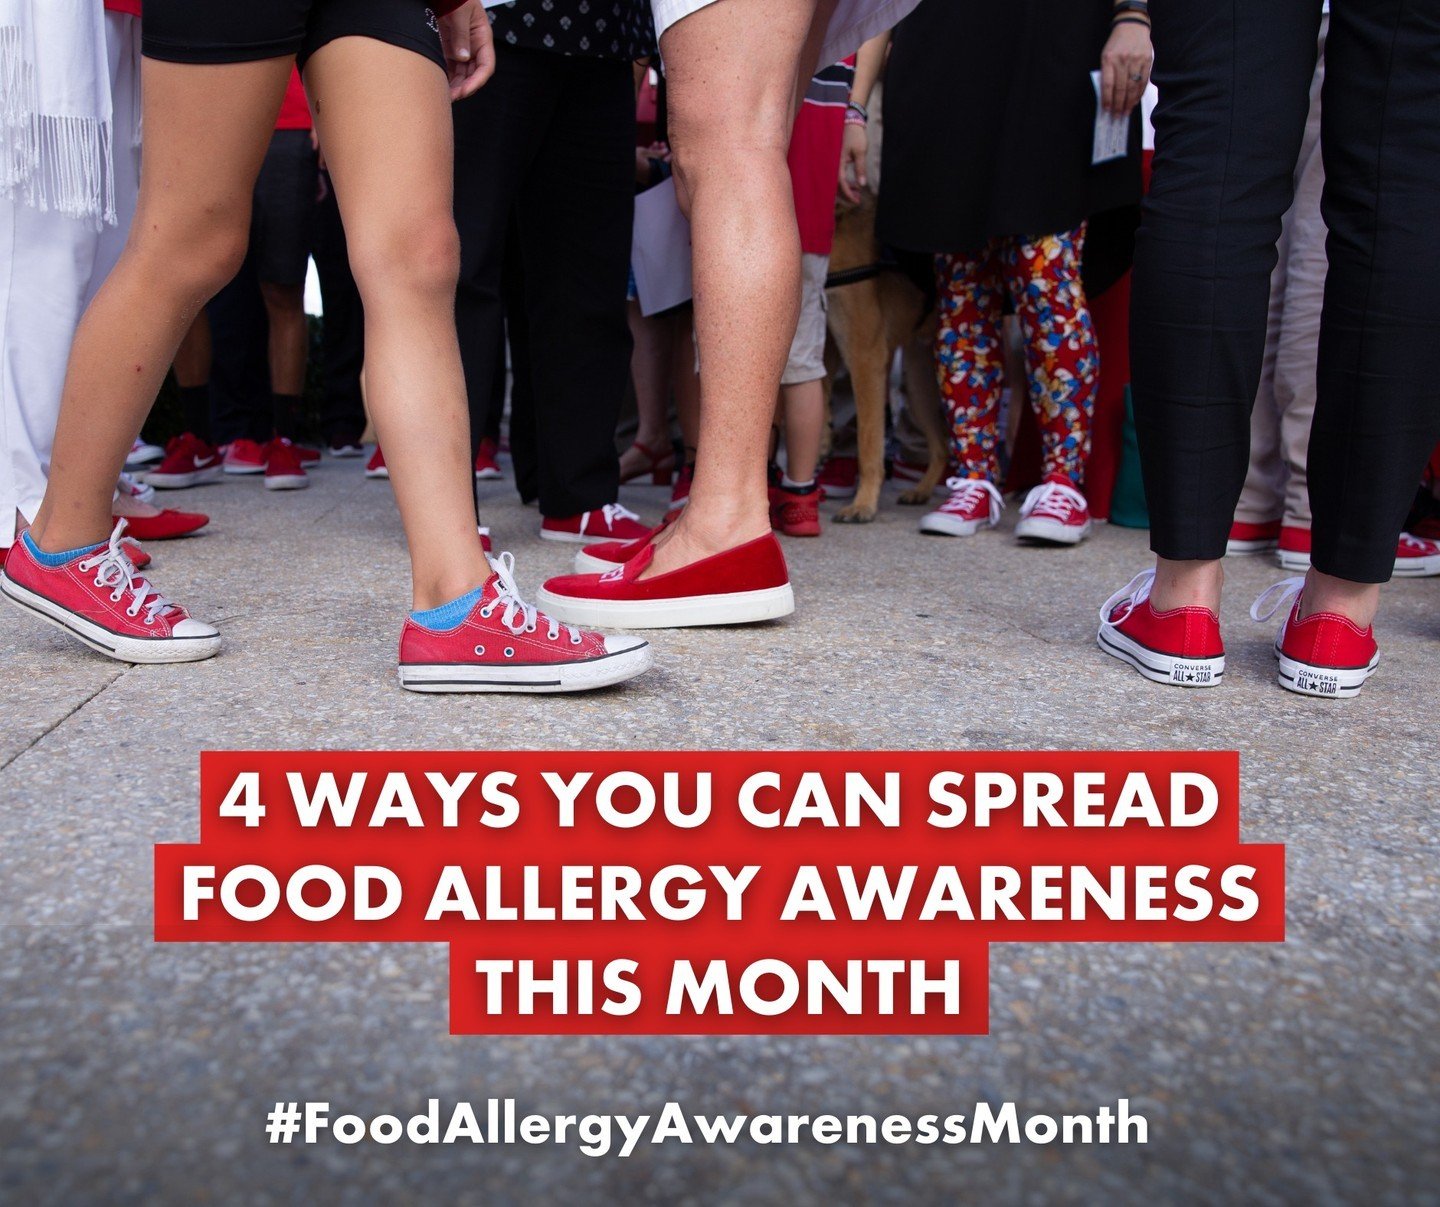 We are already halfway through #FoodAllergyAwarenessMonth, but there&rsquo;s still plenty of time to spread awareness! Here are 4 things you can do this month to help the #foodallergycommunity:

1️⃣ EDUCATE YOUR LOCAL COMMUNITY
&bull; Consider traini